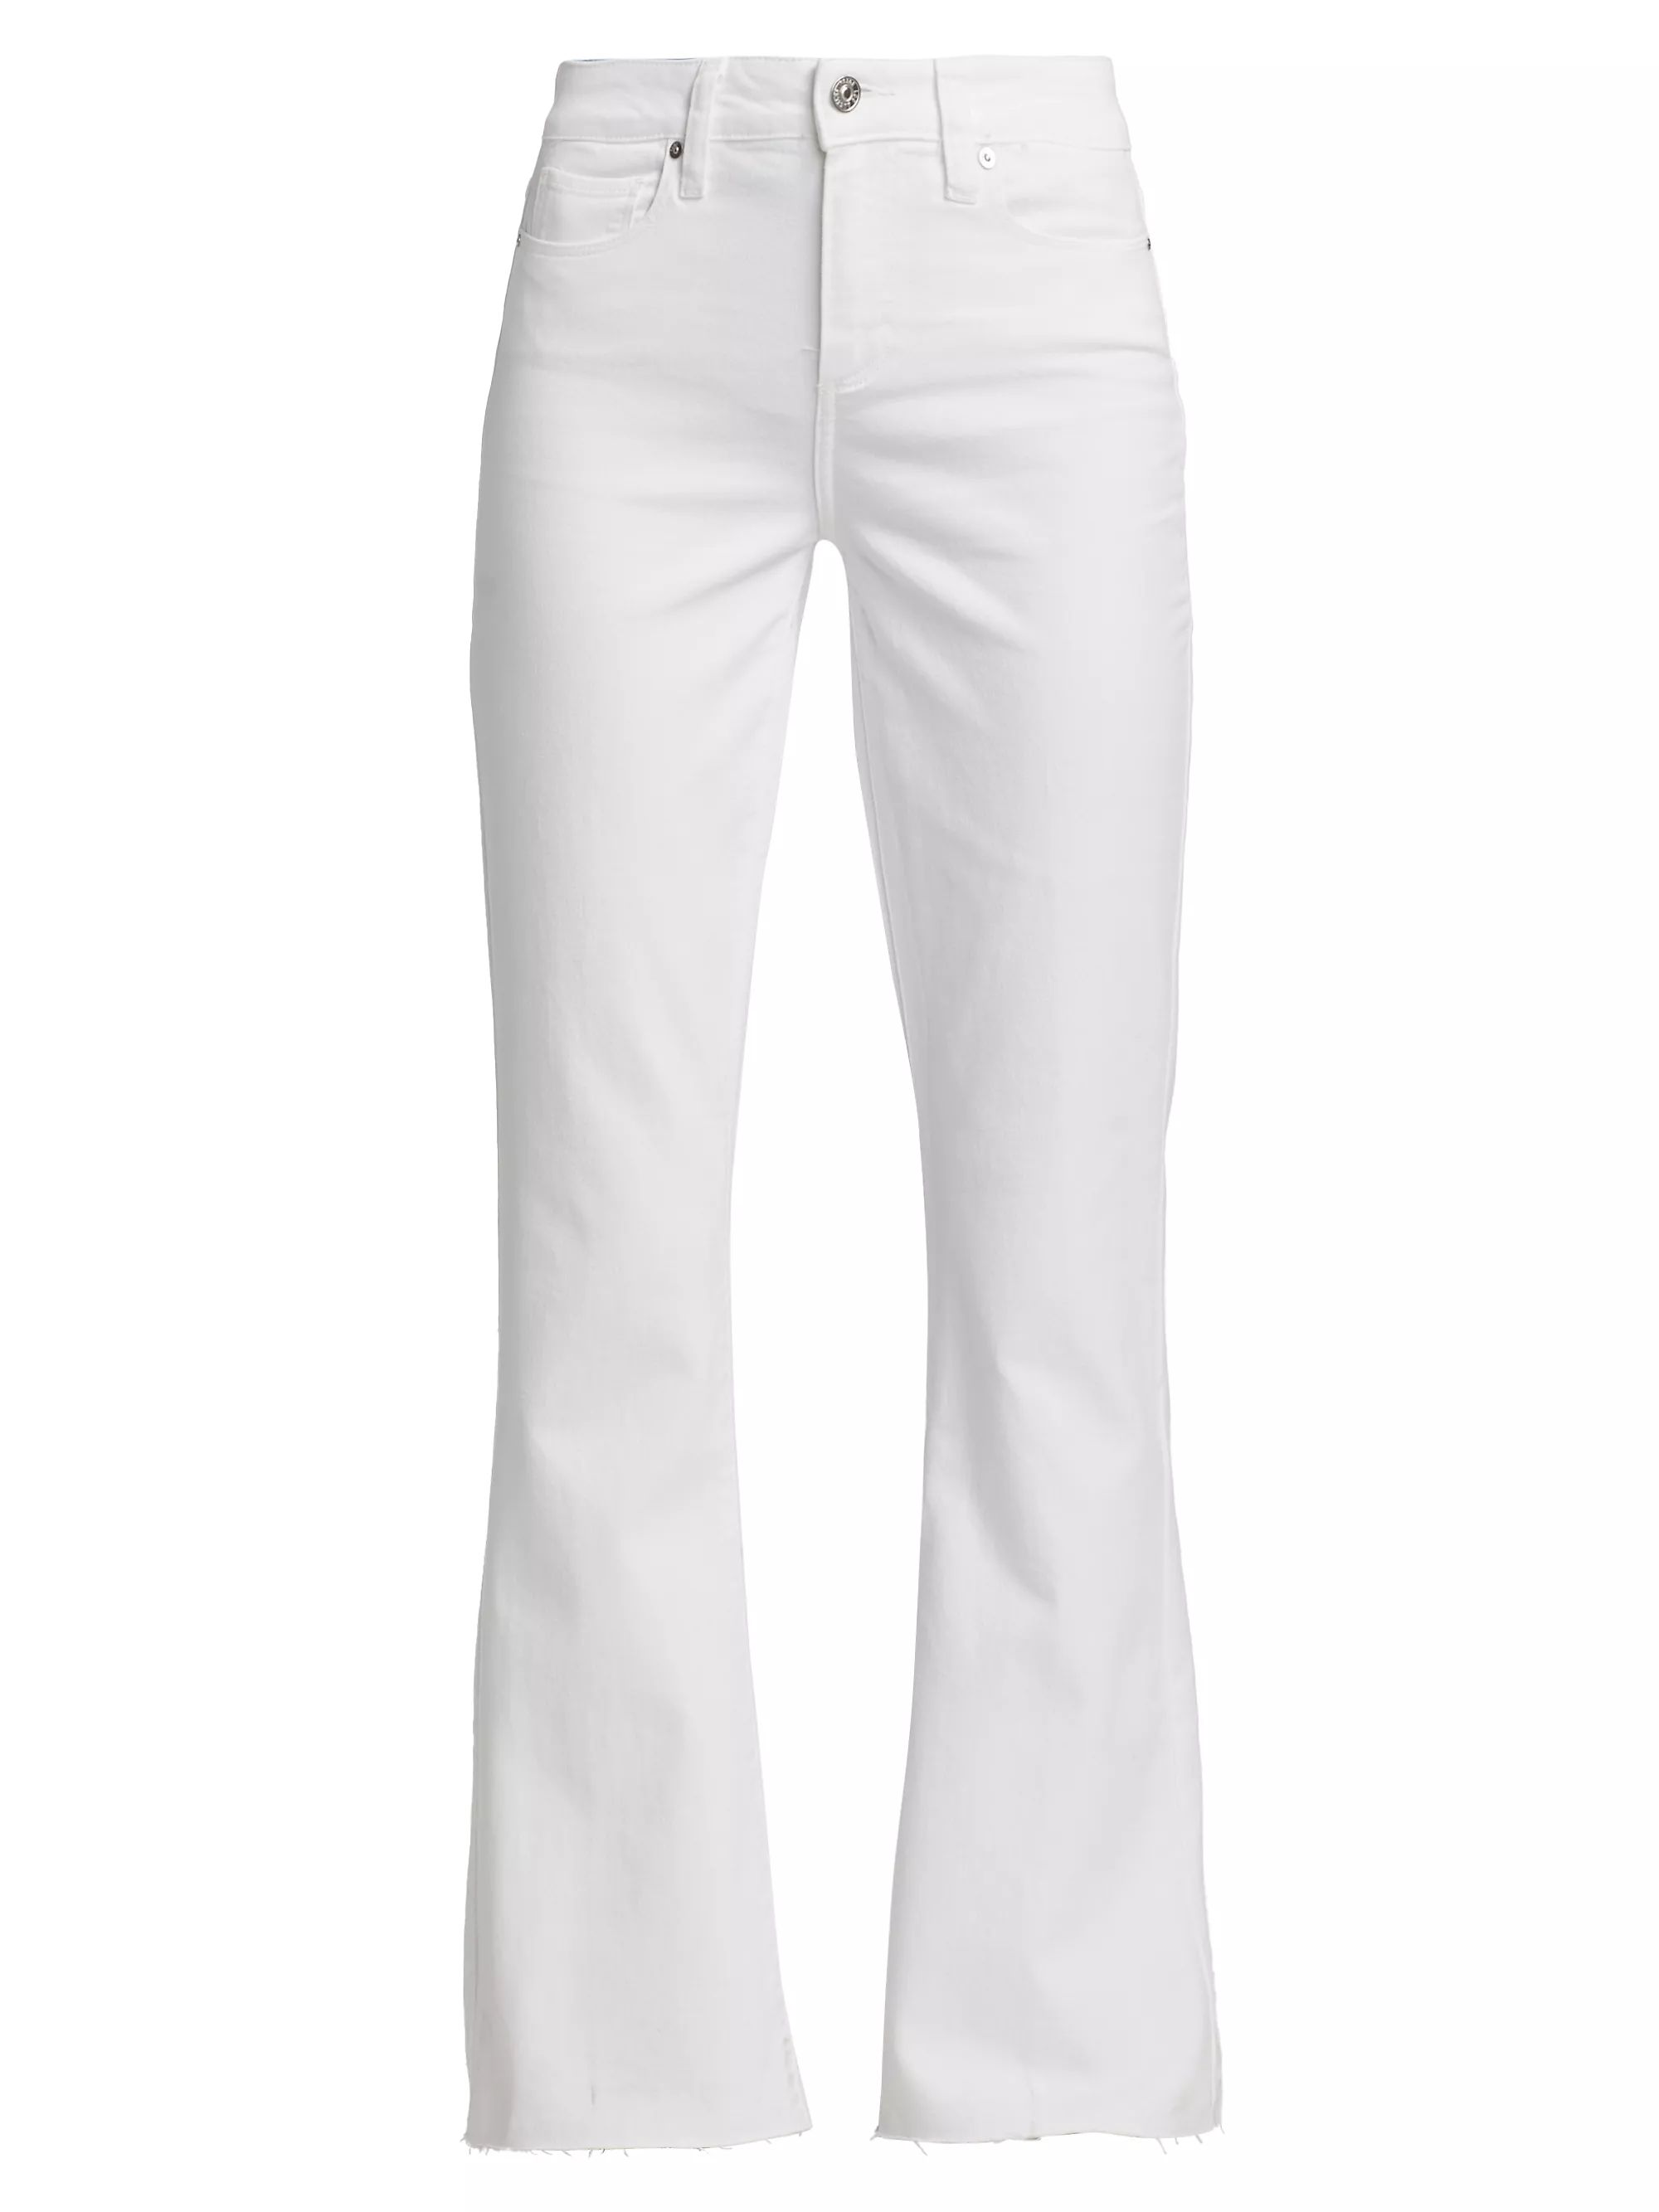 Flared Laurel Canyon Jeans | Saks Fifth Avenue